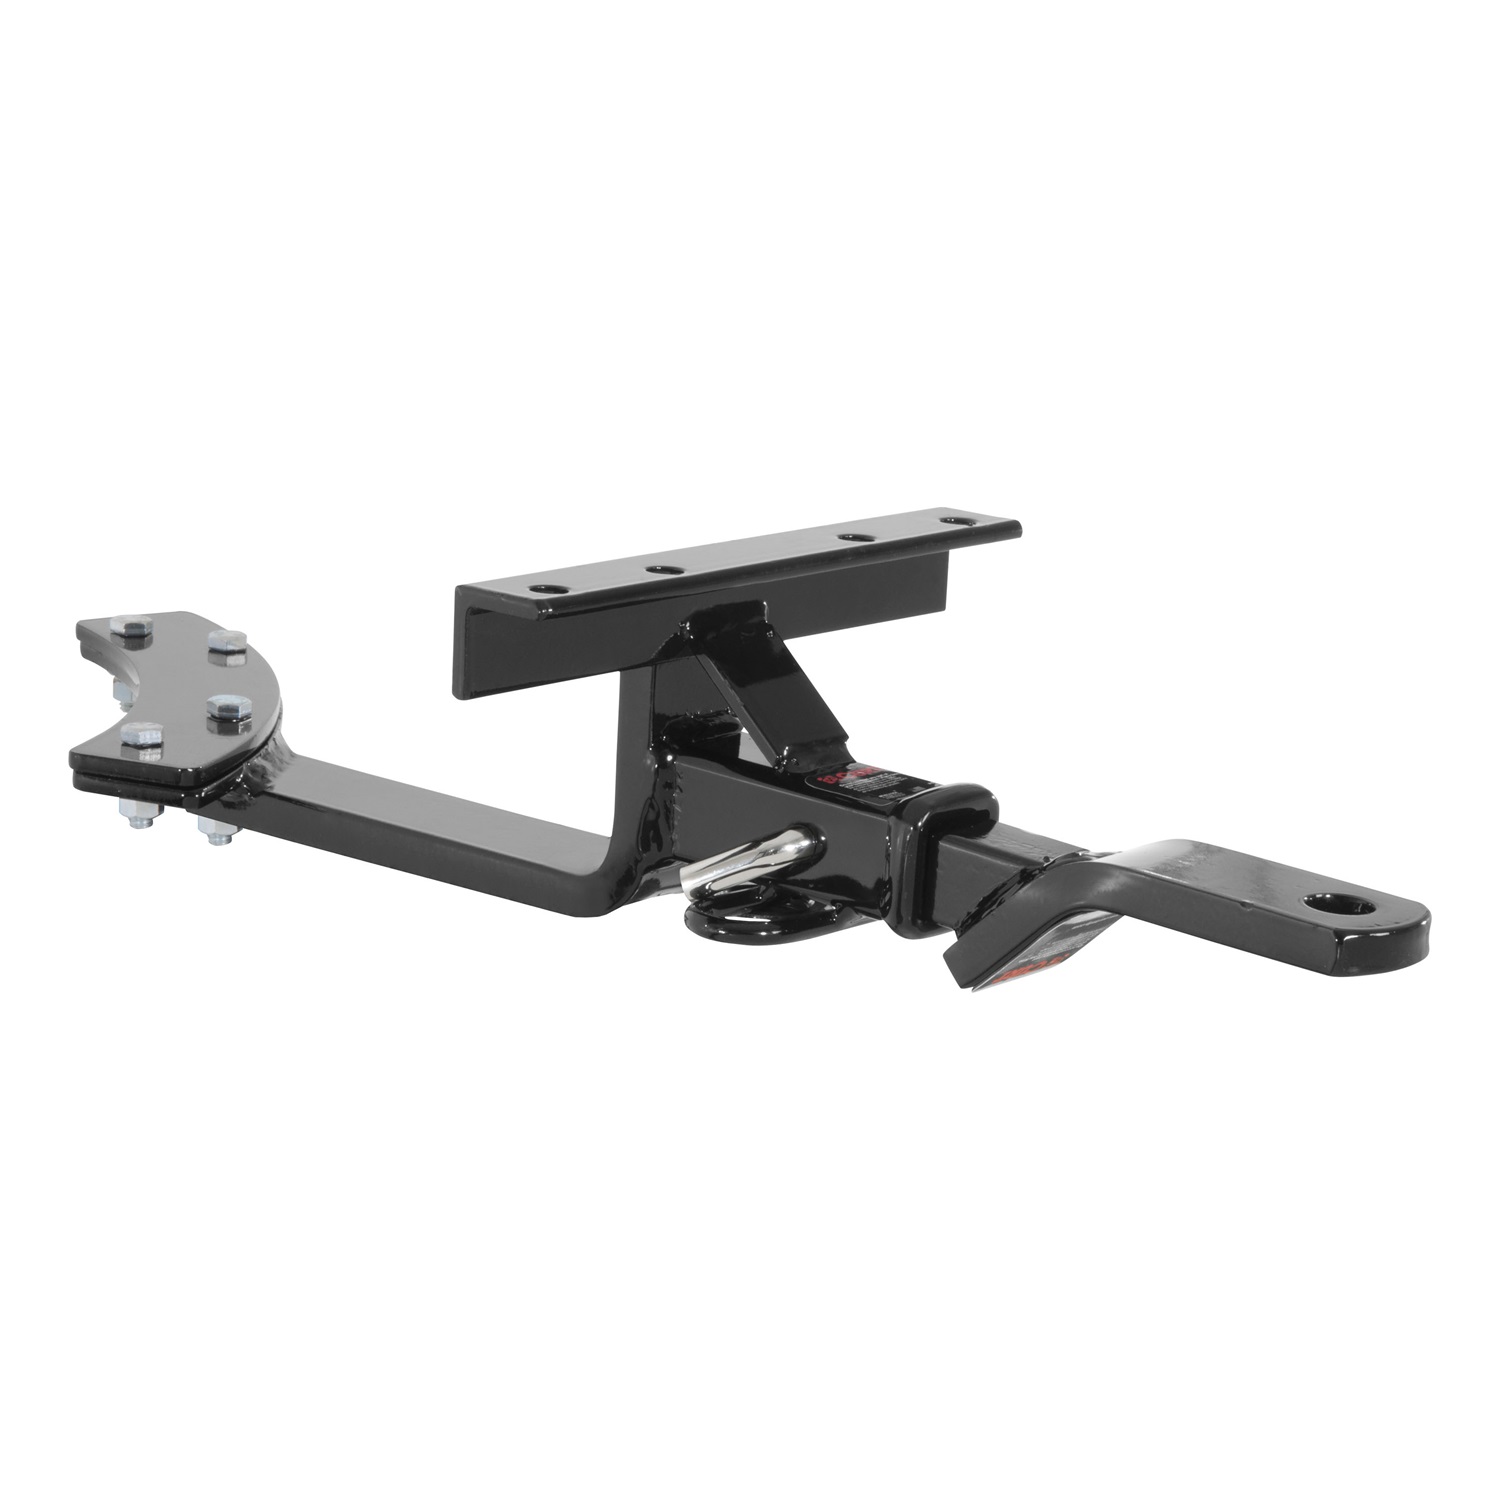 CURT Trailer Hitches - Black - 112373 - image 2 of 4